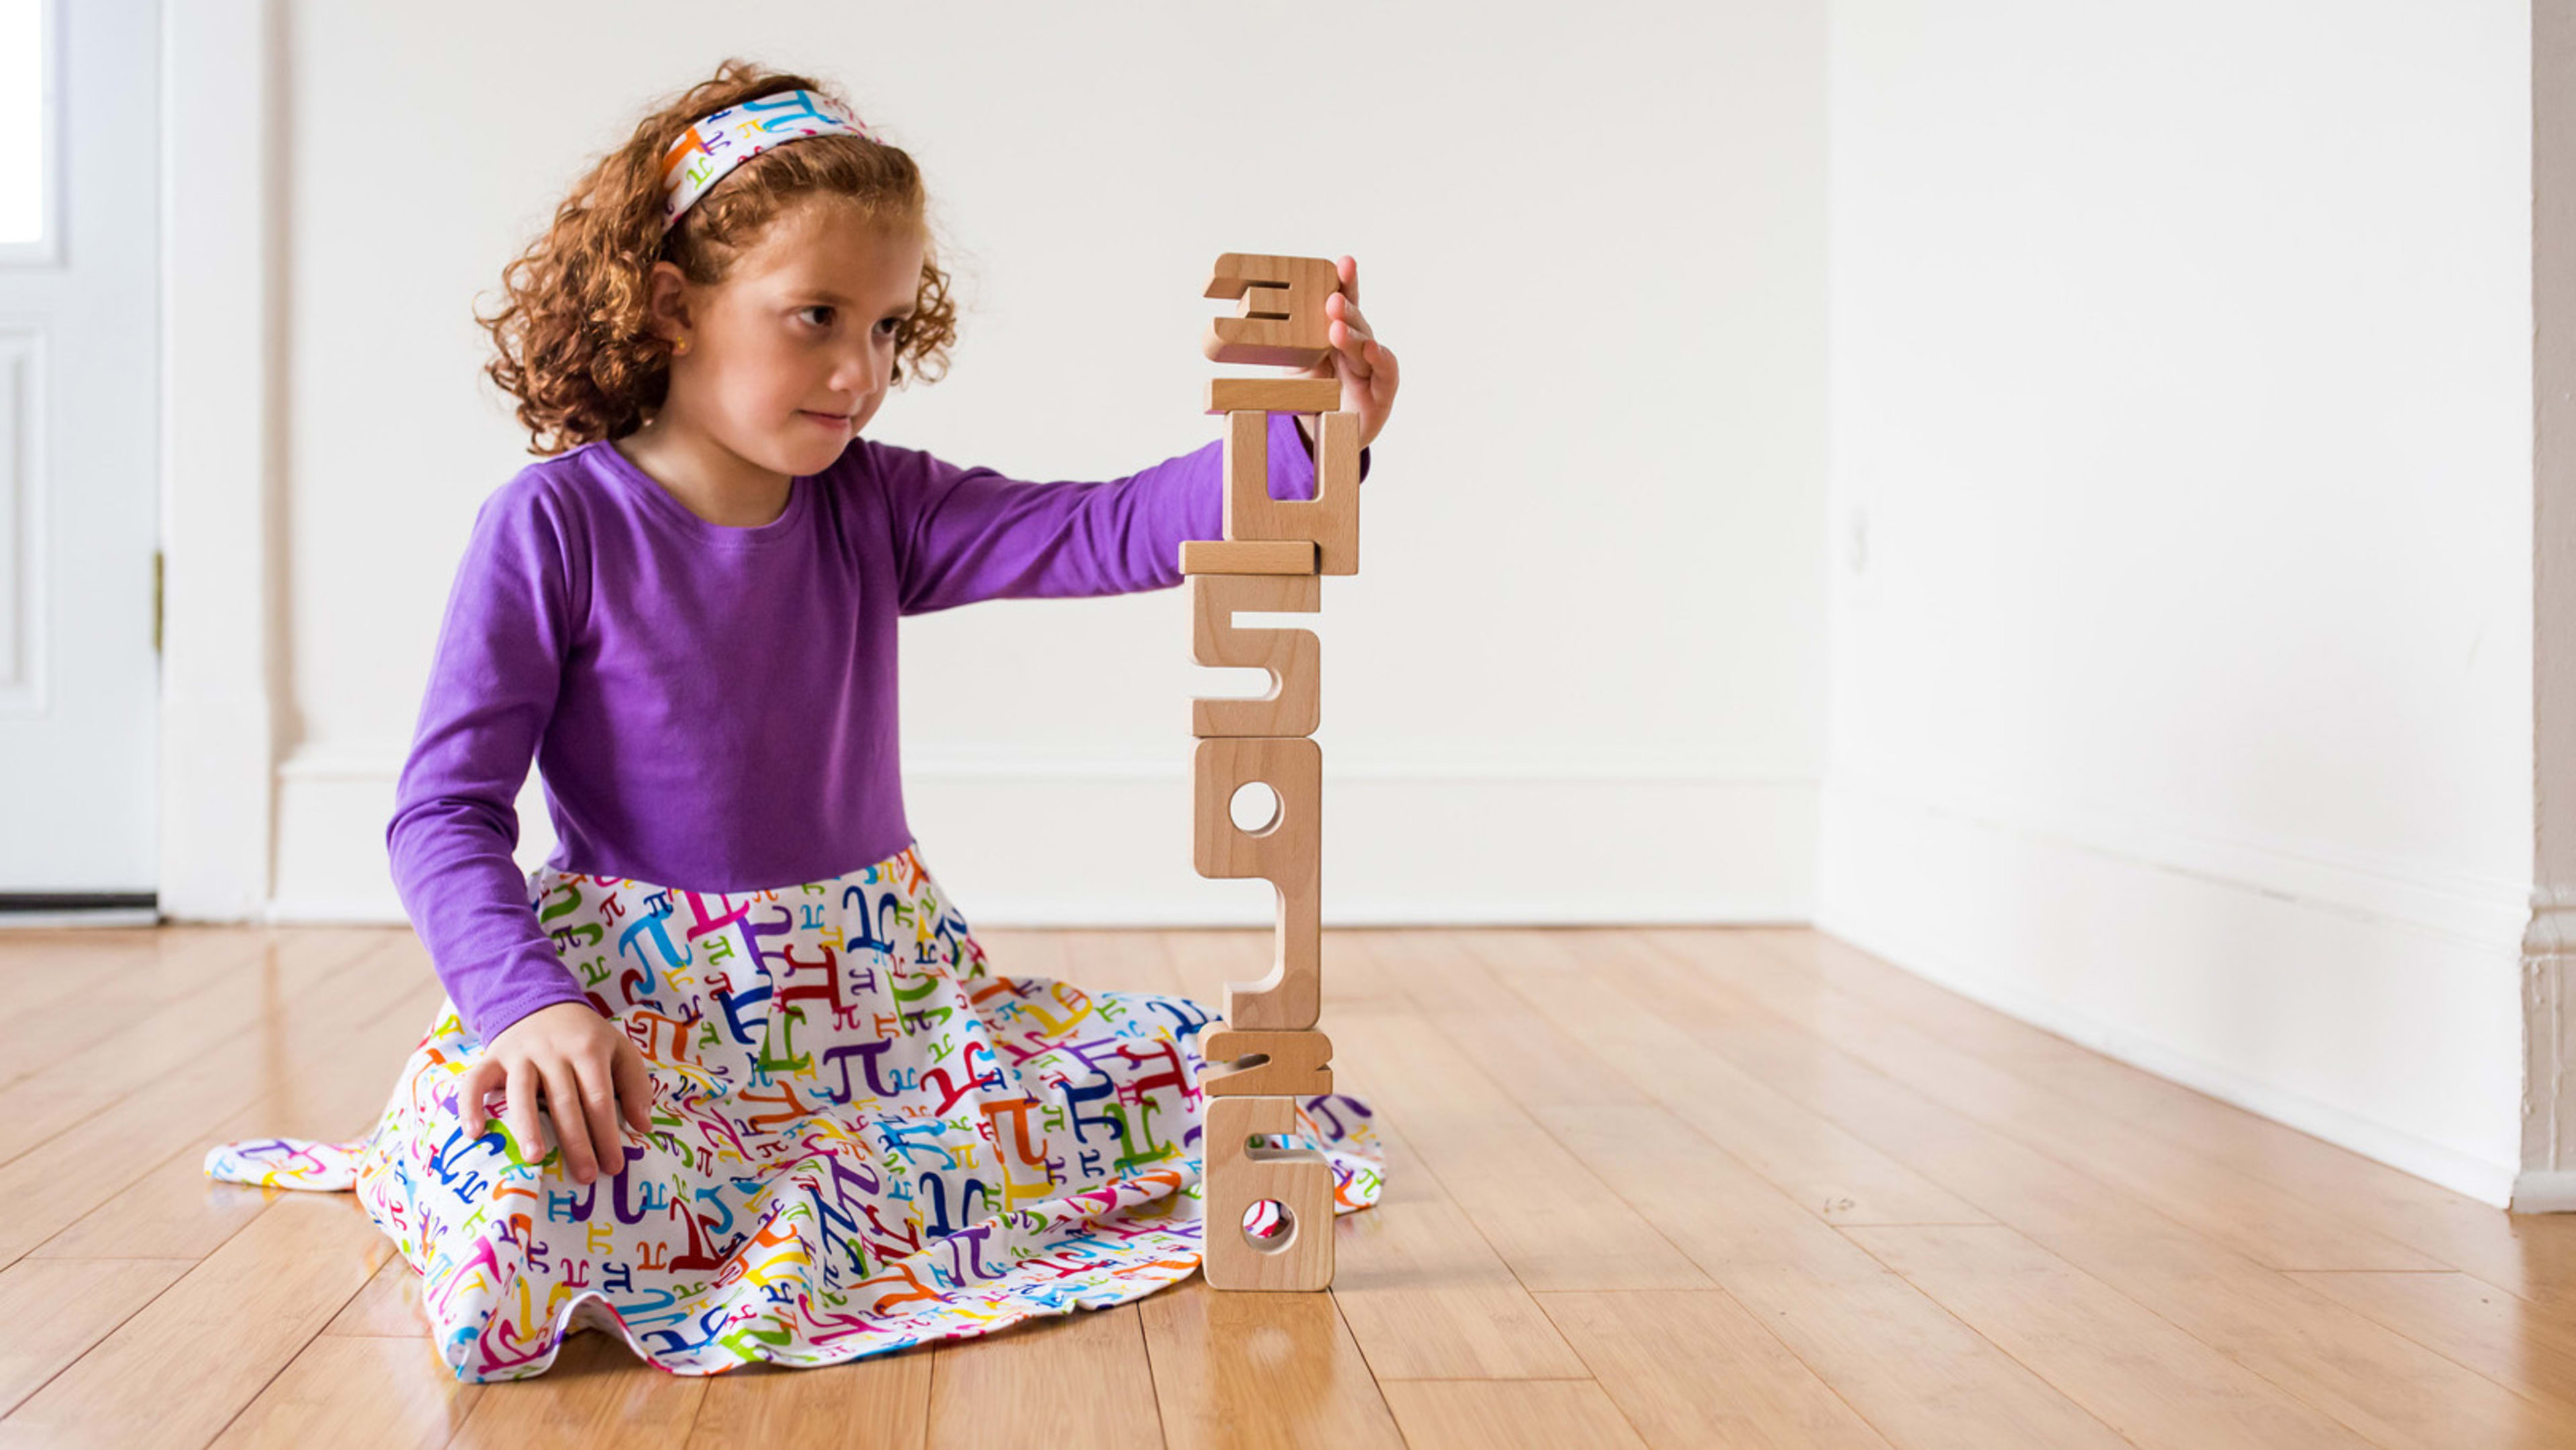 Move over, princesses. These girls’ clothing brands glorify science